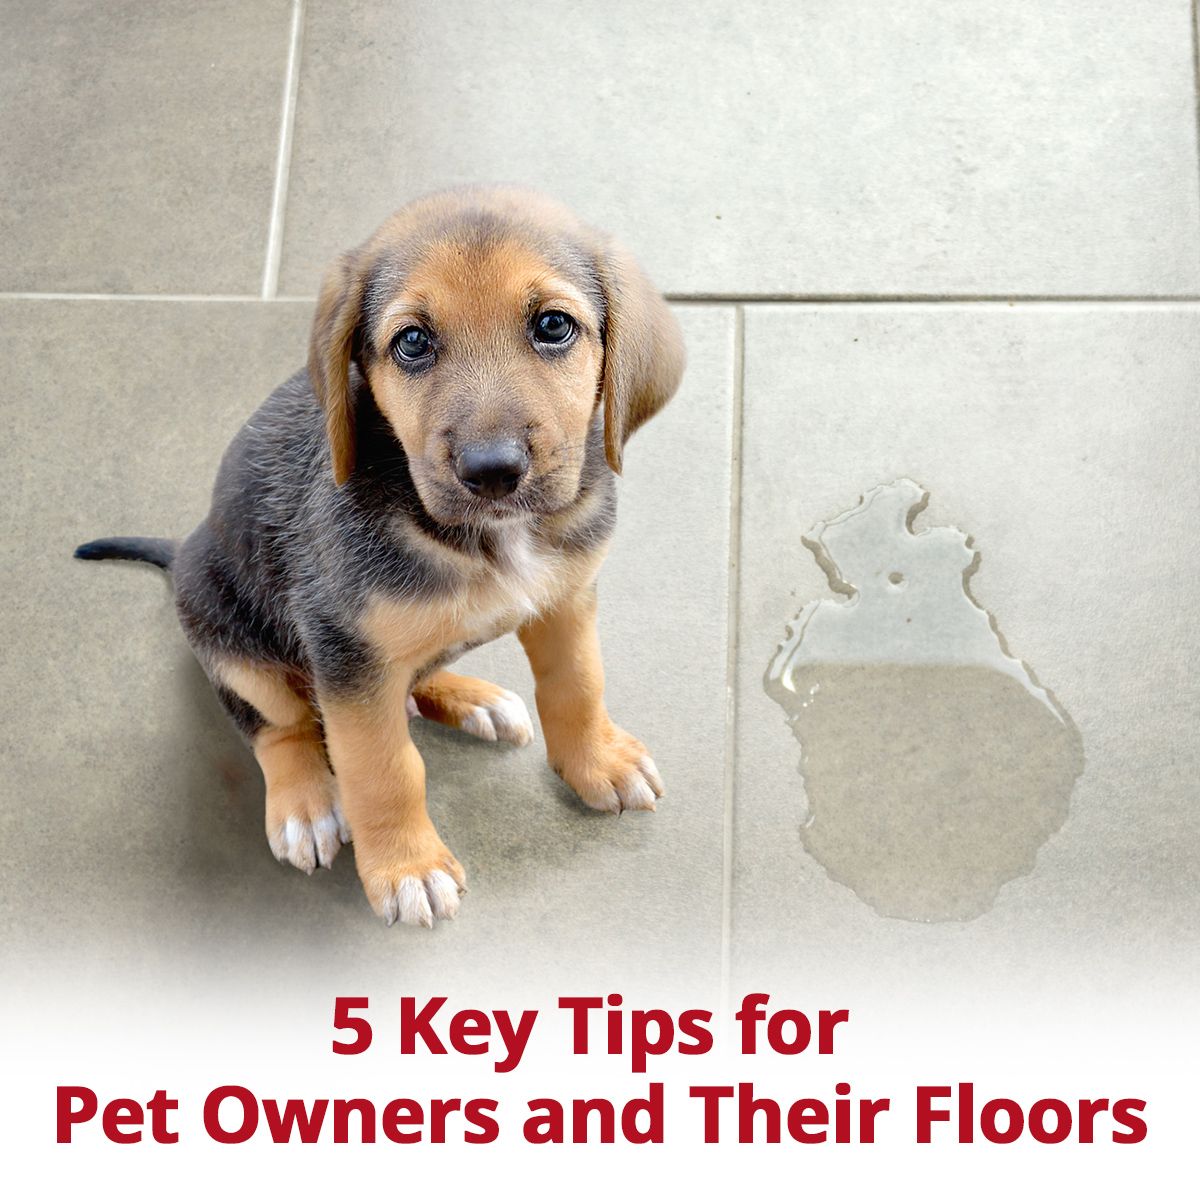 5 Key Tips for Pet Owners and Their Floors